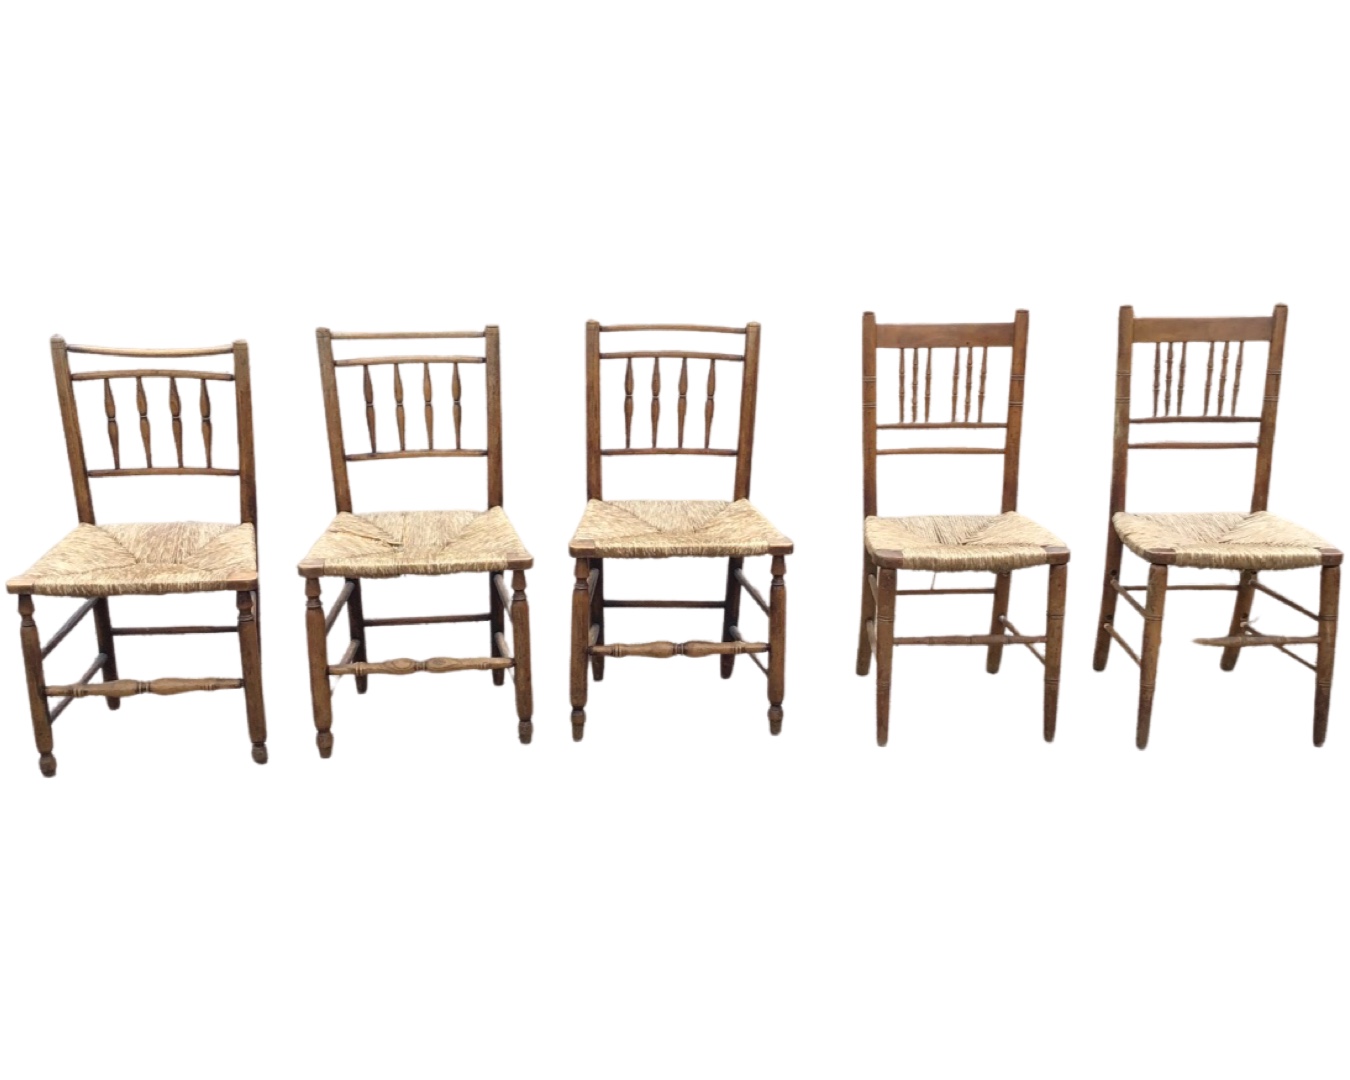 A married set of nineteenth century country oak rush seated chairs with turned spindles to backs,